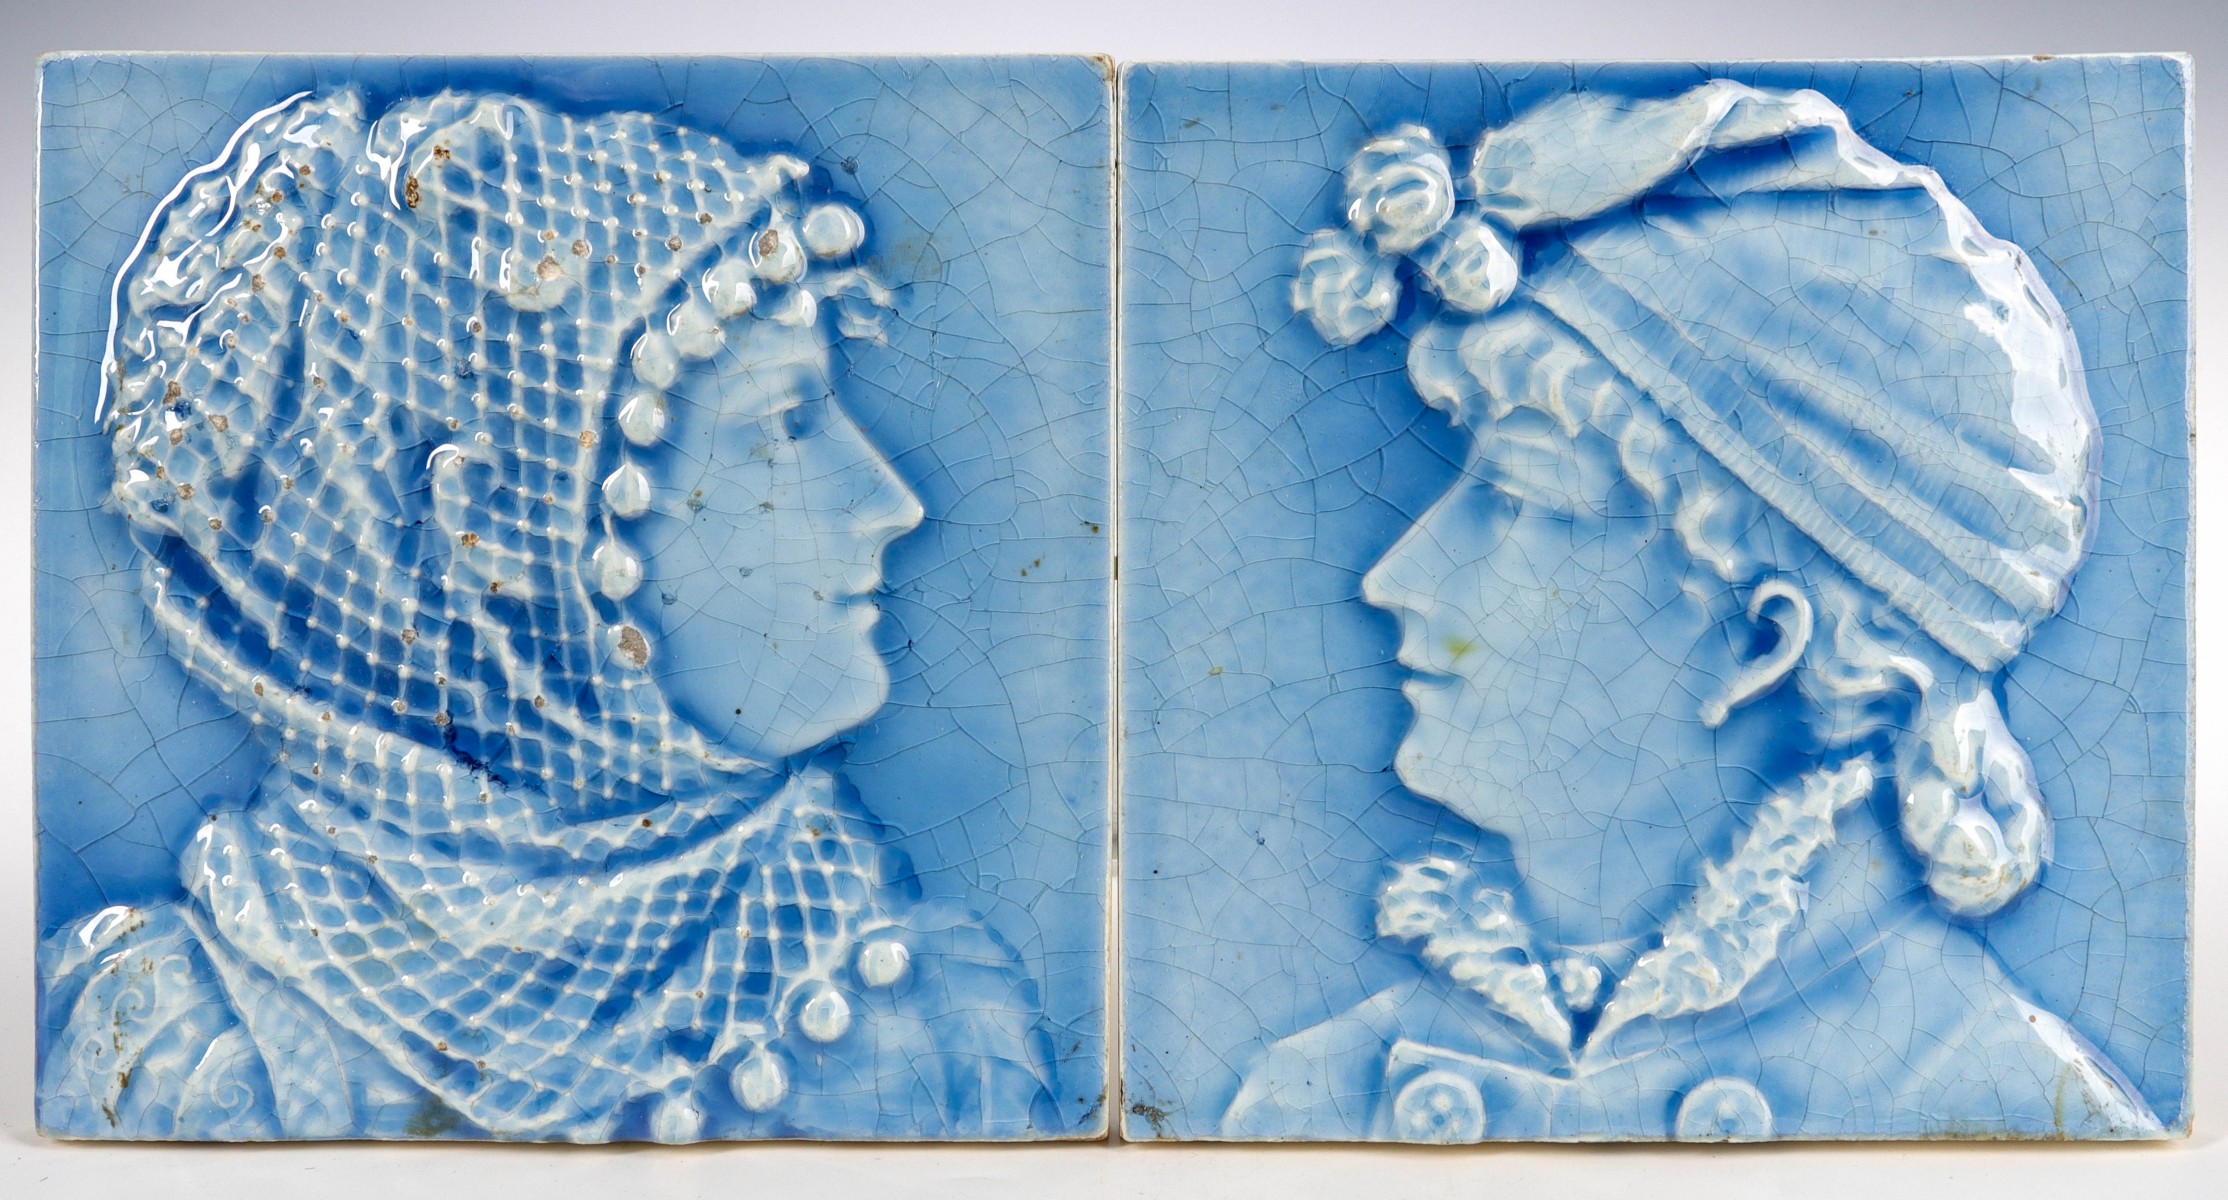 TWO TRENT VICTORIAN ART POTTERY TILES